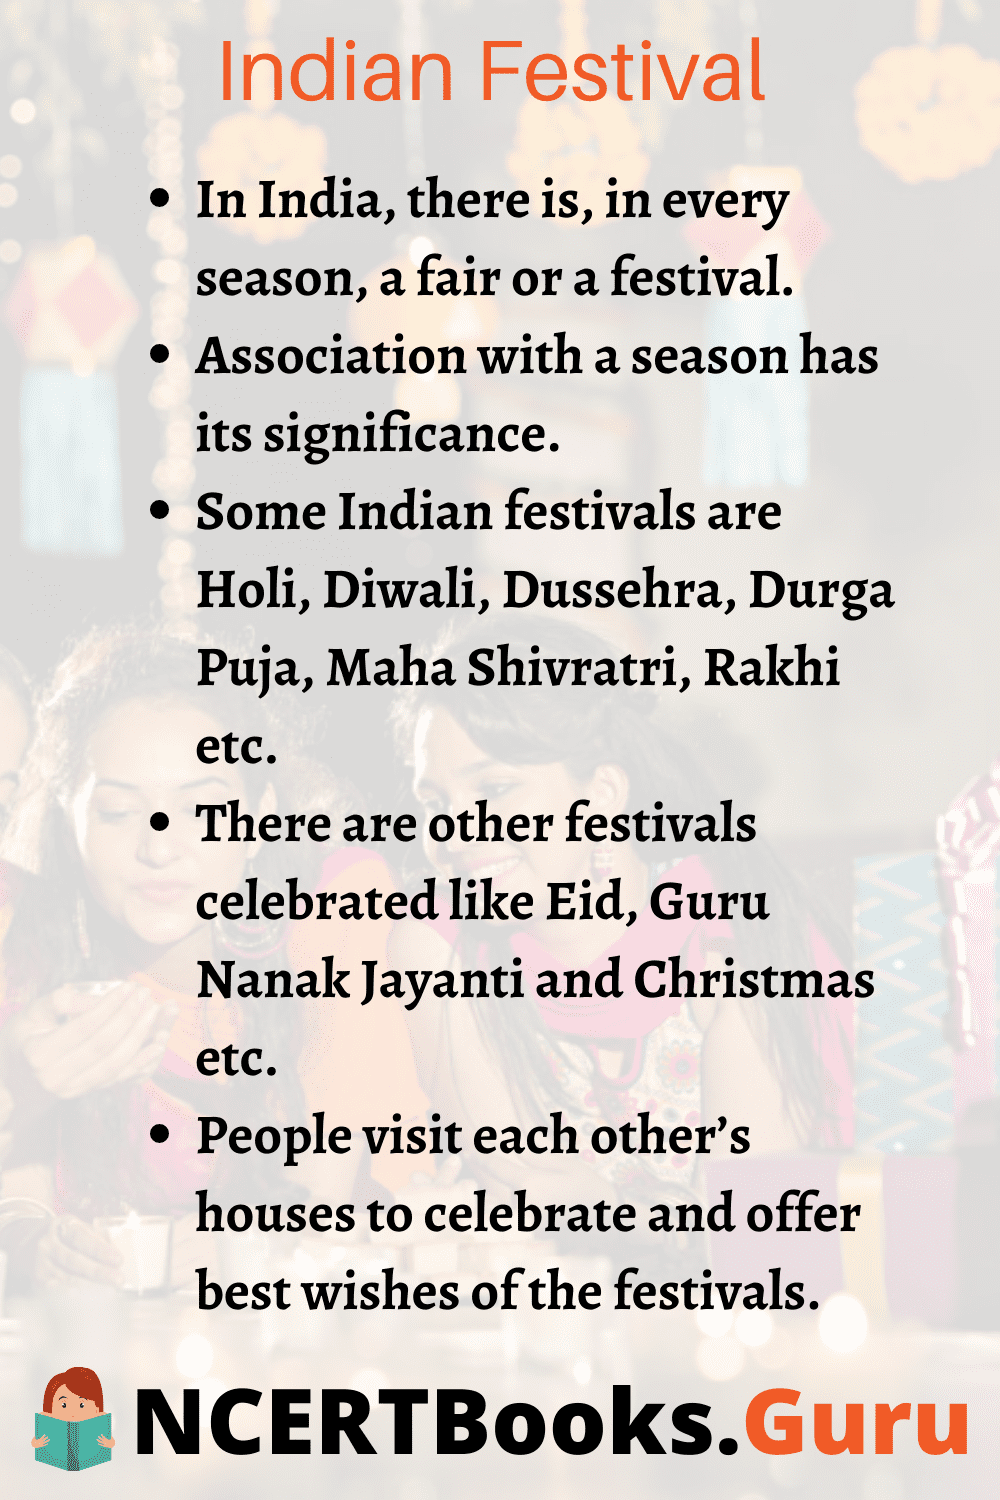 Essay on Indian Festival